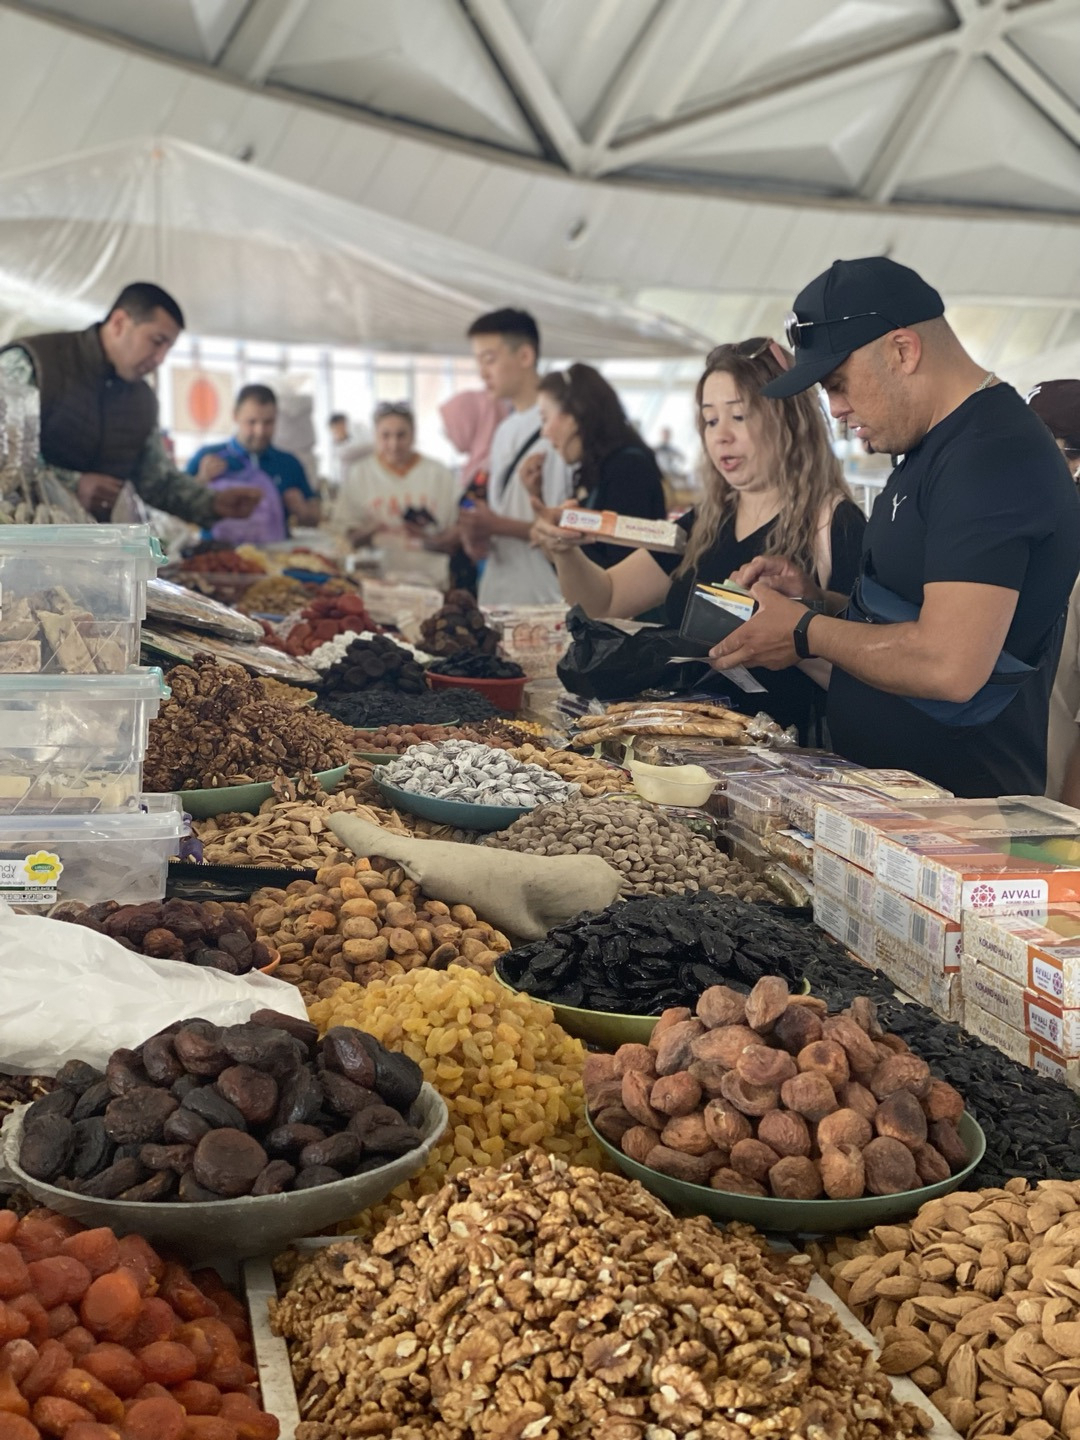 Tourists buying dry fruits at Chorsu Bazaar, a traditional market that existed in Tashkent from 18th century as center of four roads of the Great Silk Road.(Sanjay Kumar/The Korea Herald)